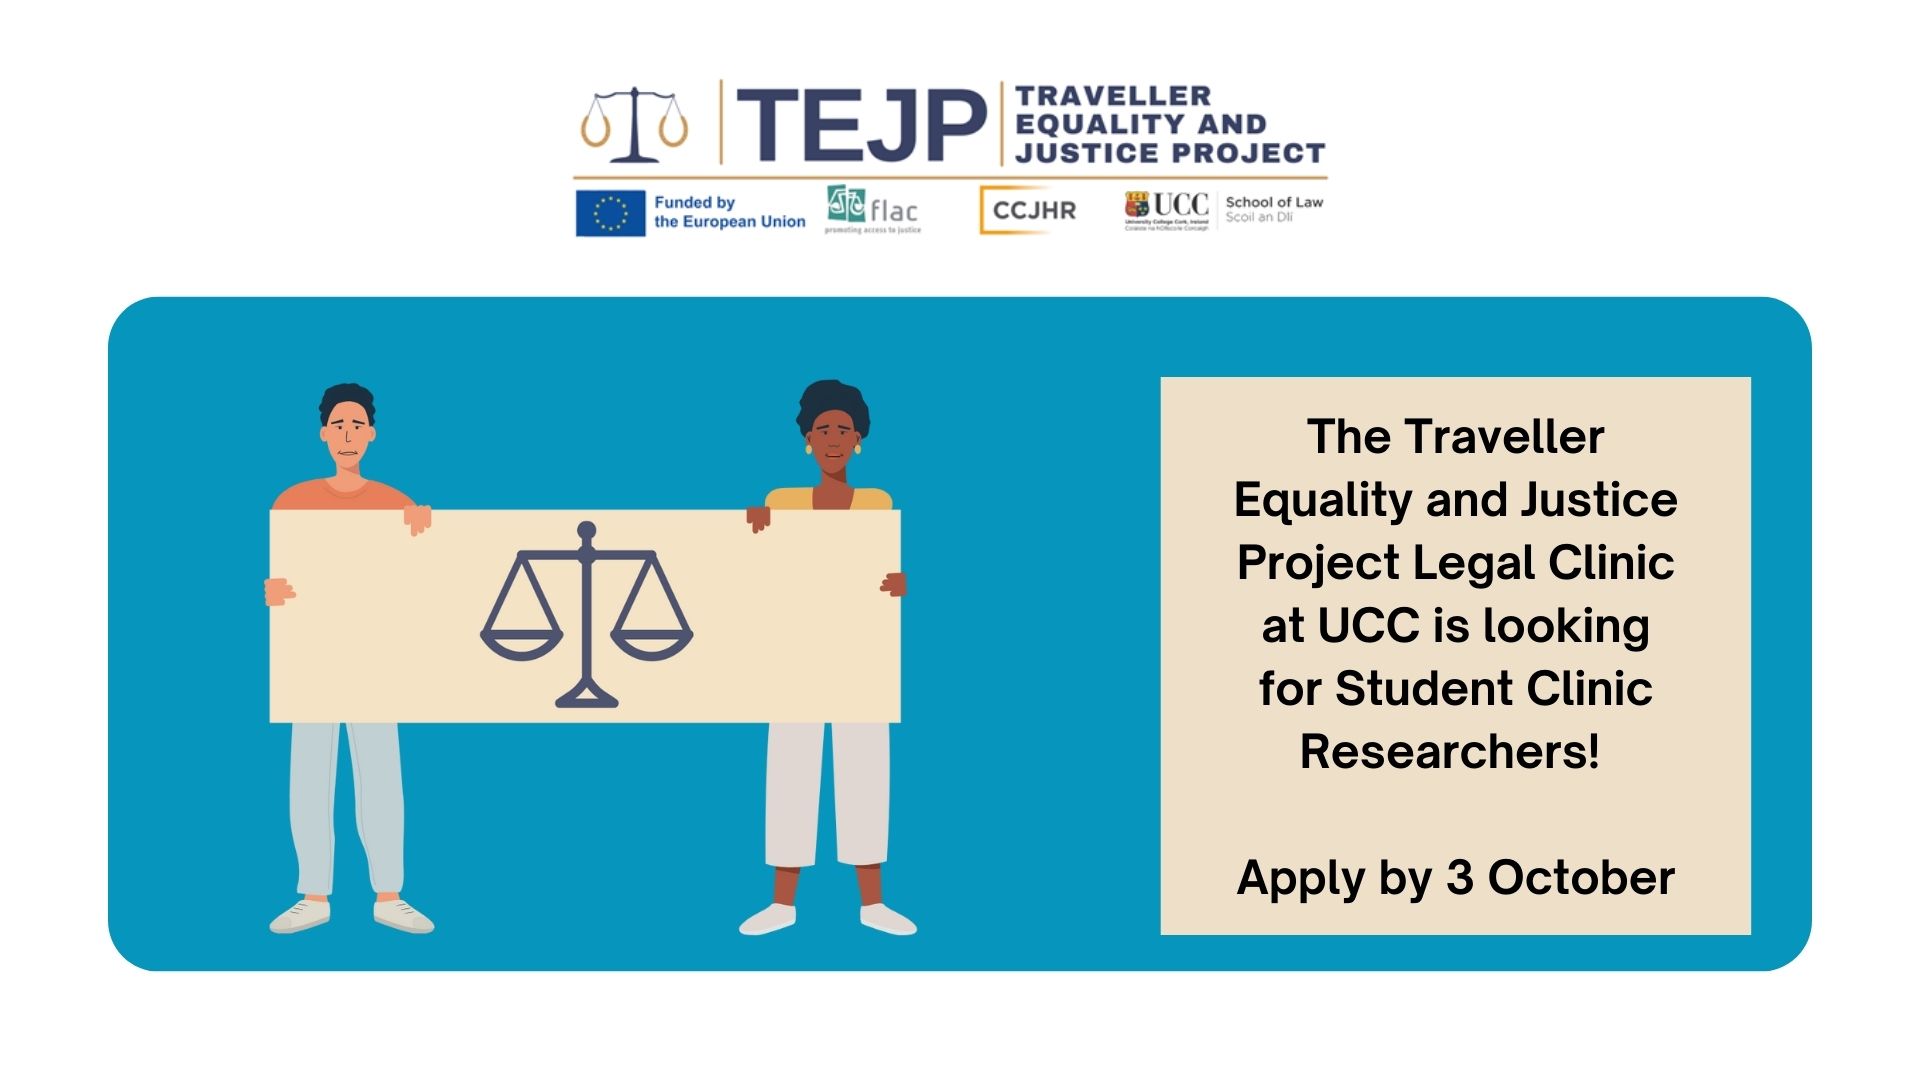 Student Clinic Researchers Wanted for Traveller Equality and Justice Project Legal Clinic